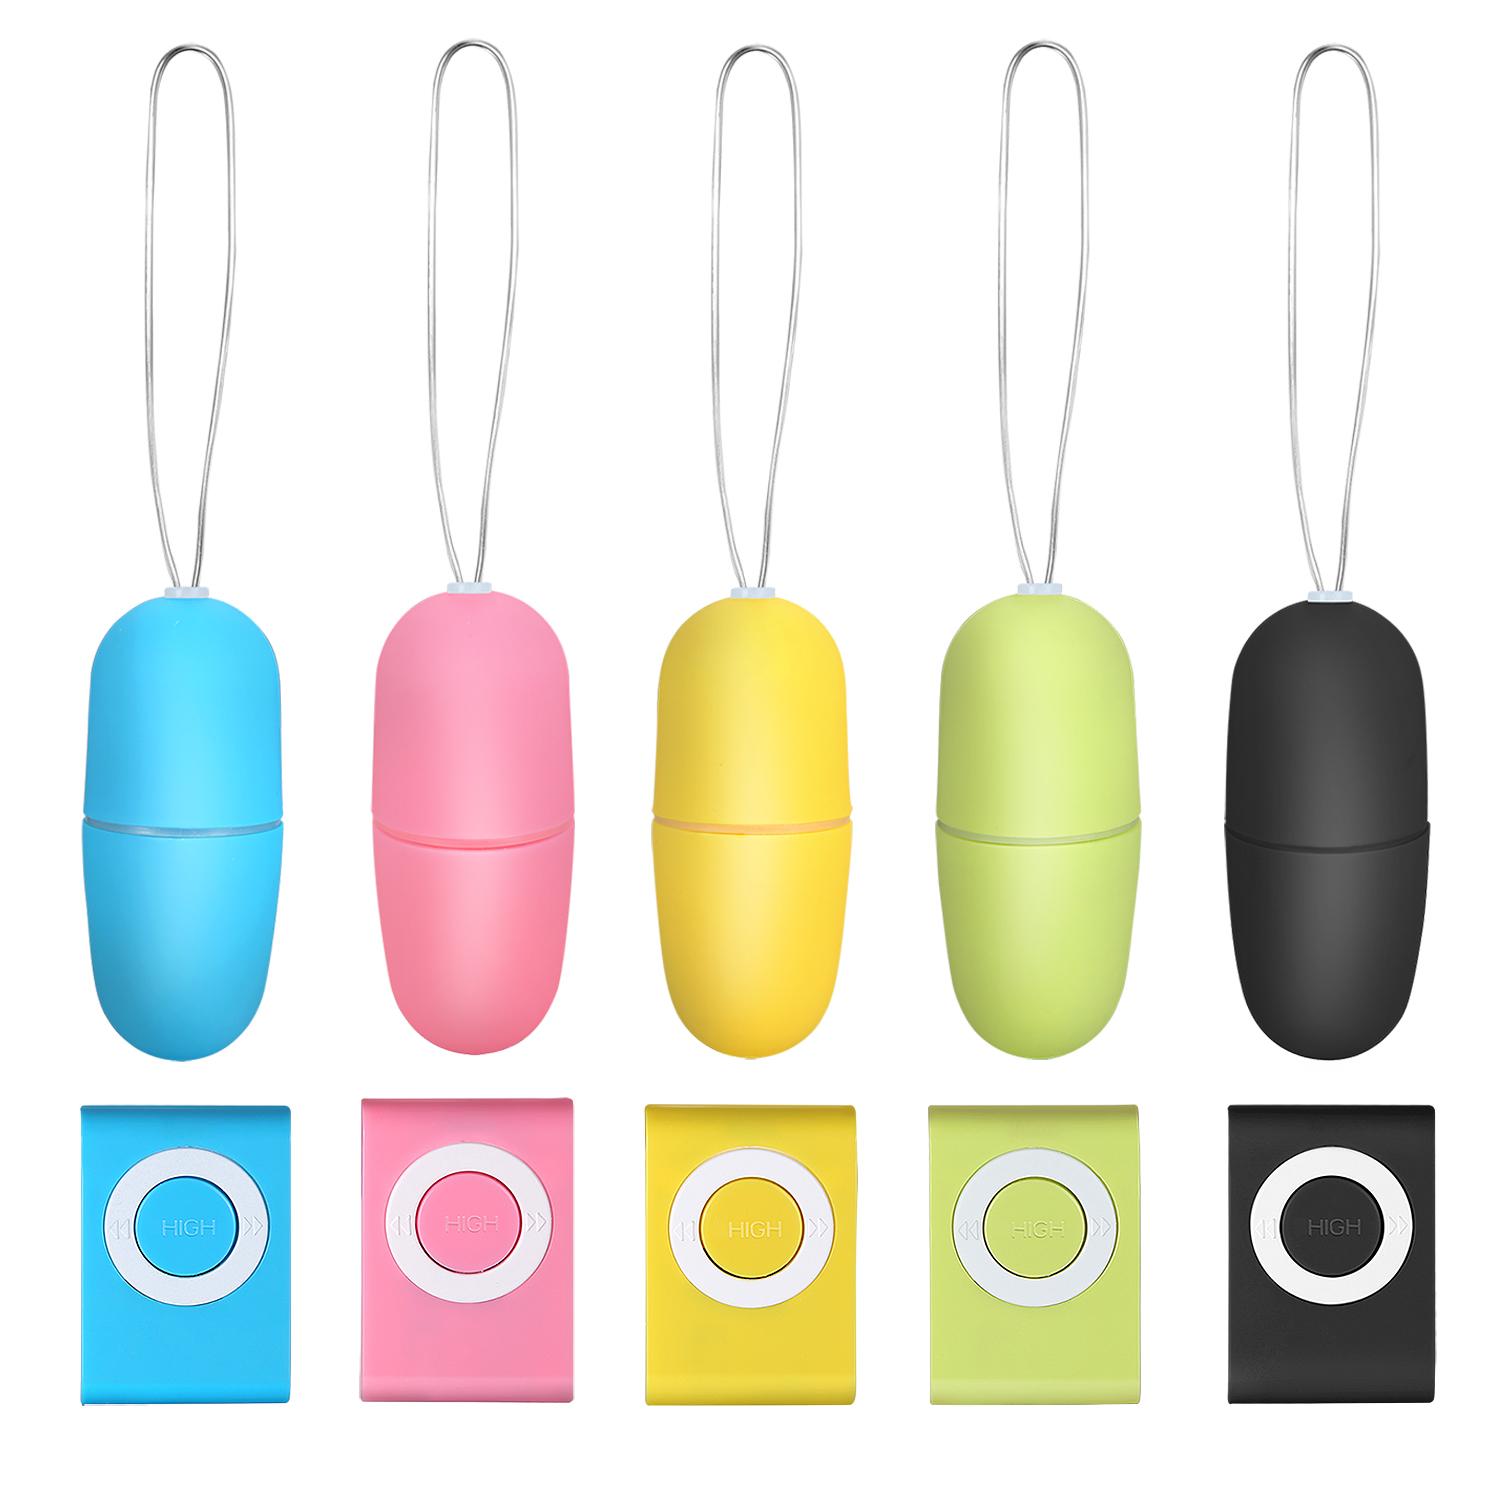 Popular Wireless Remote Control Jump Egg Sex Toy Love Egg Panty Bullet Vibrator Sex Toys For Woman